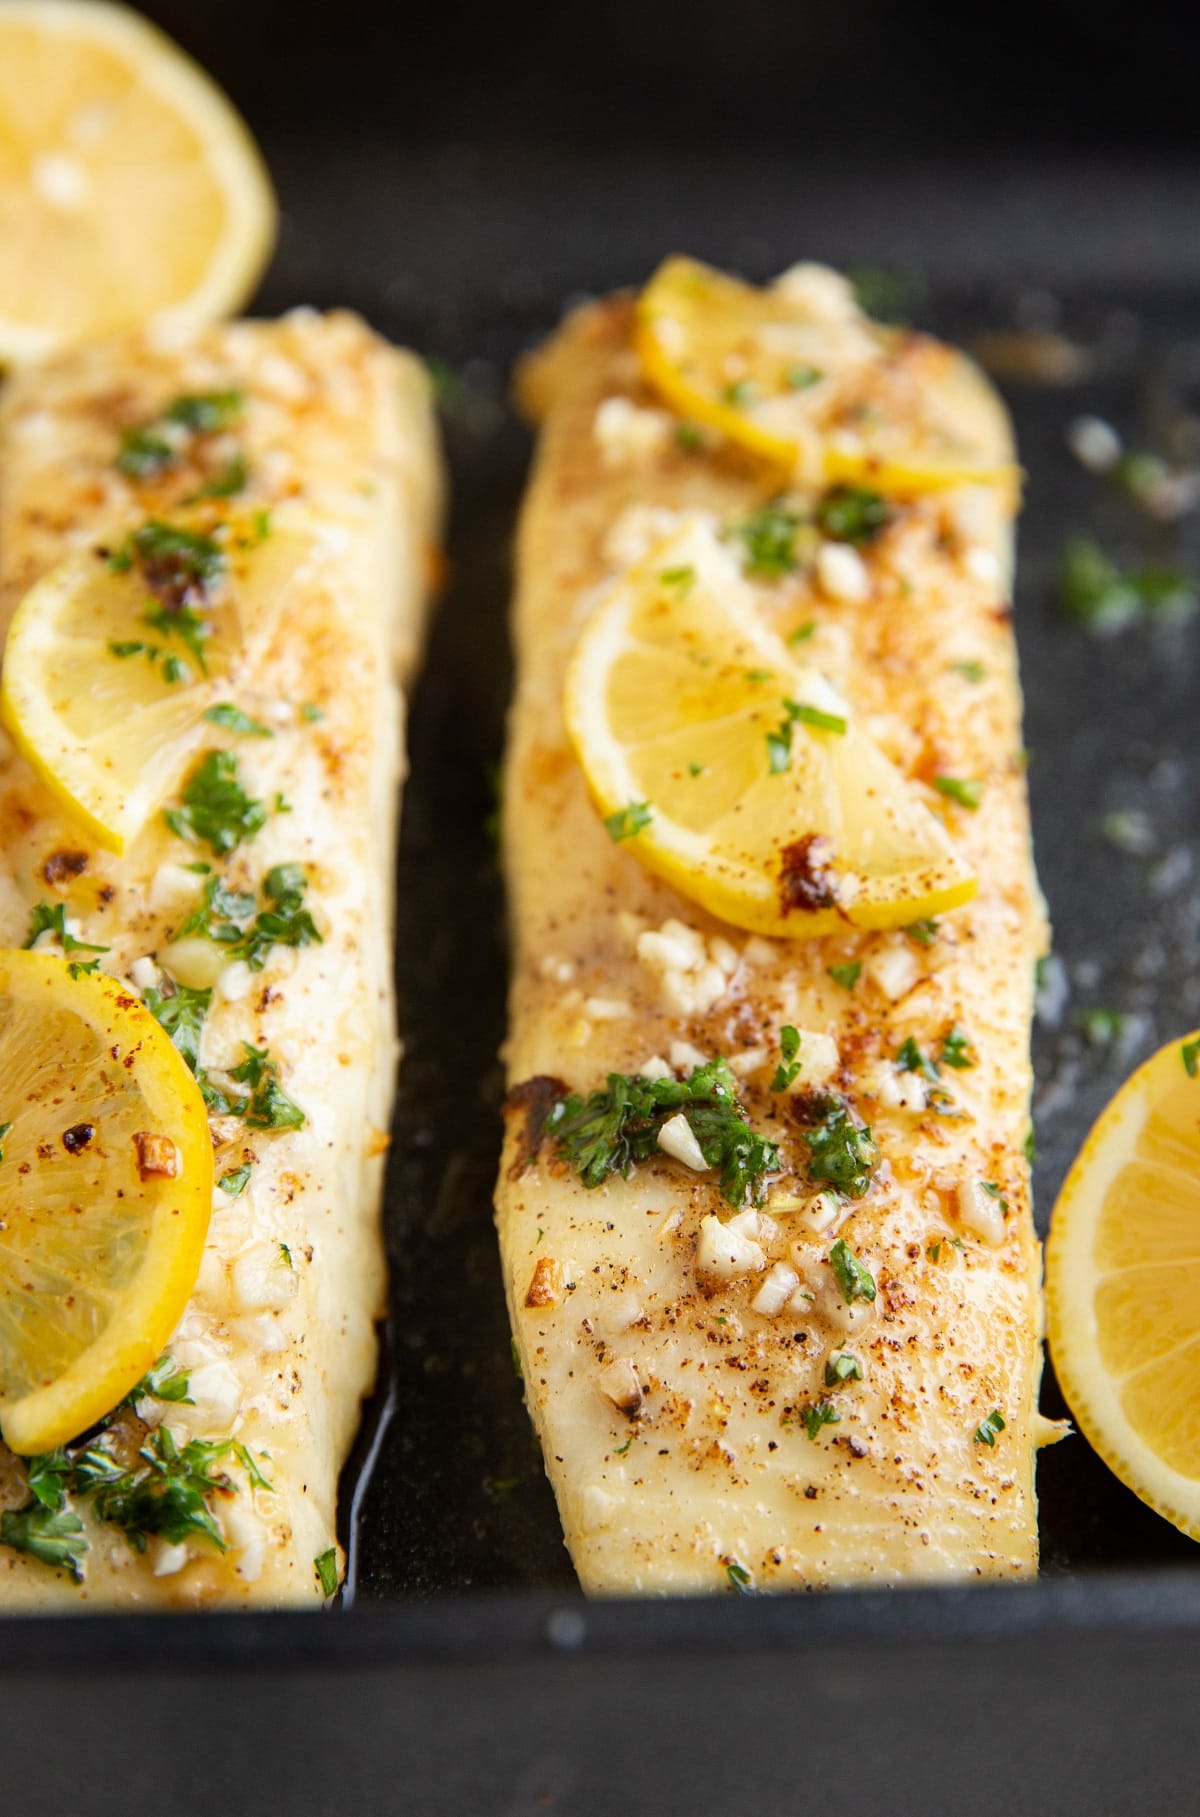 Lemon garlic butter baked halibut fresh out of the oven in a baking dish, ready to serve.